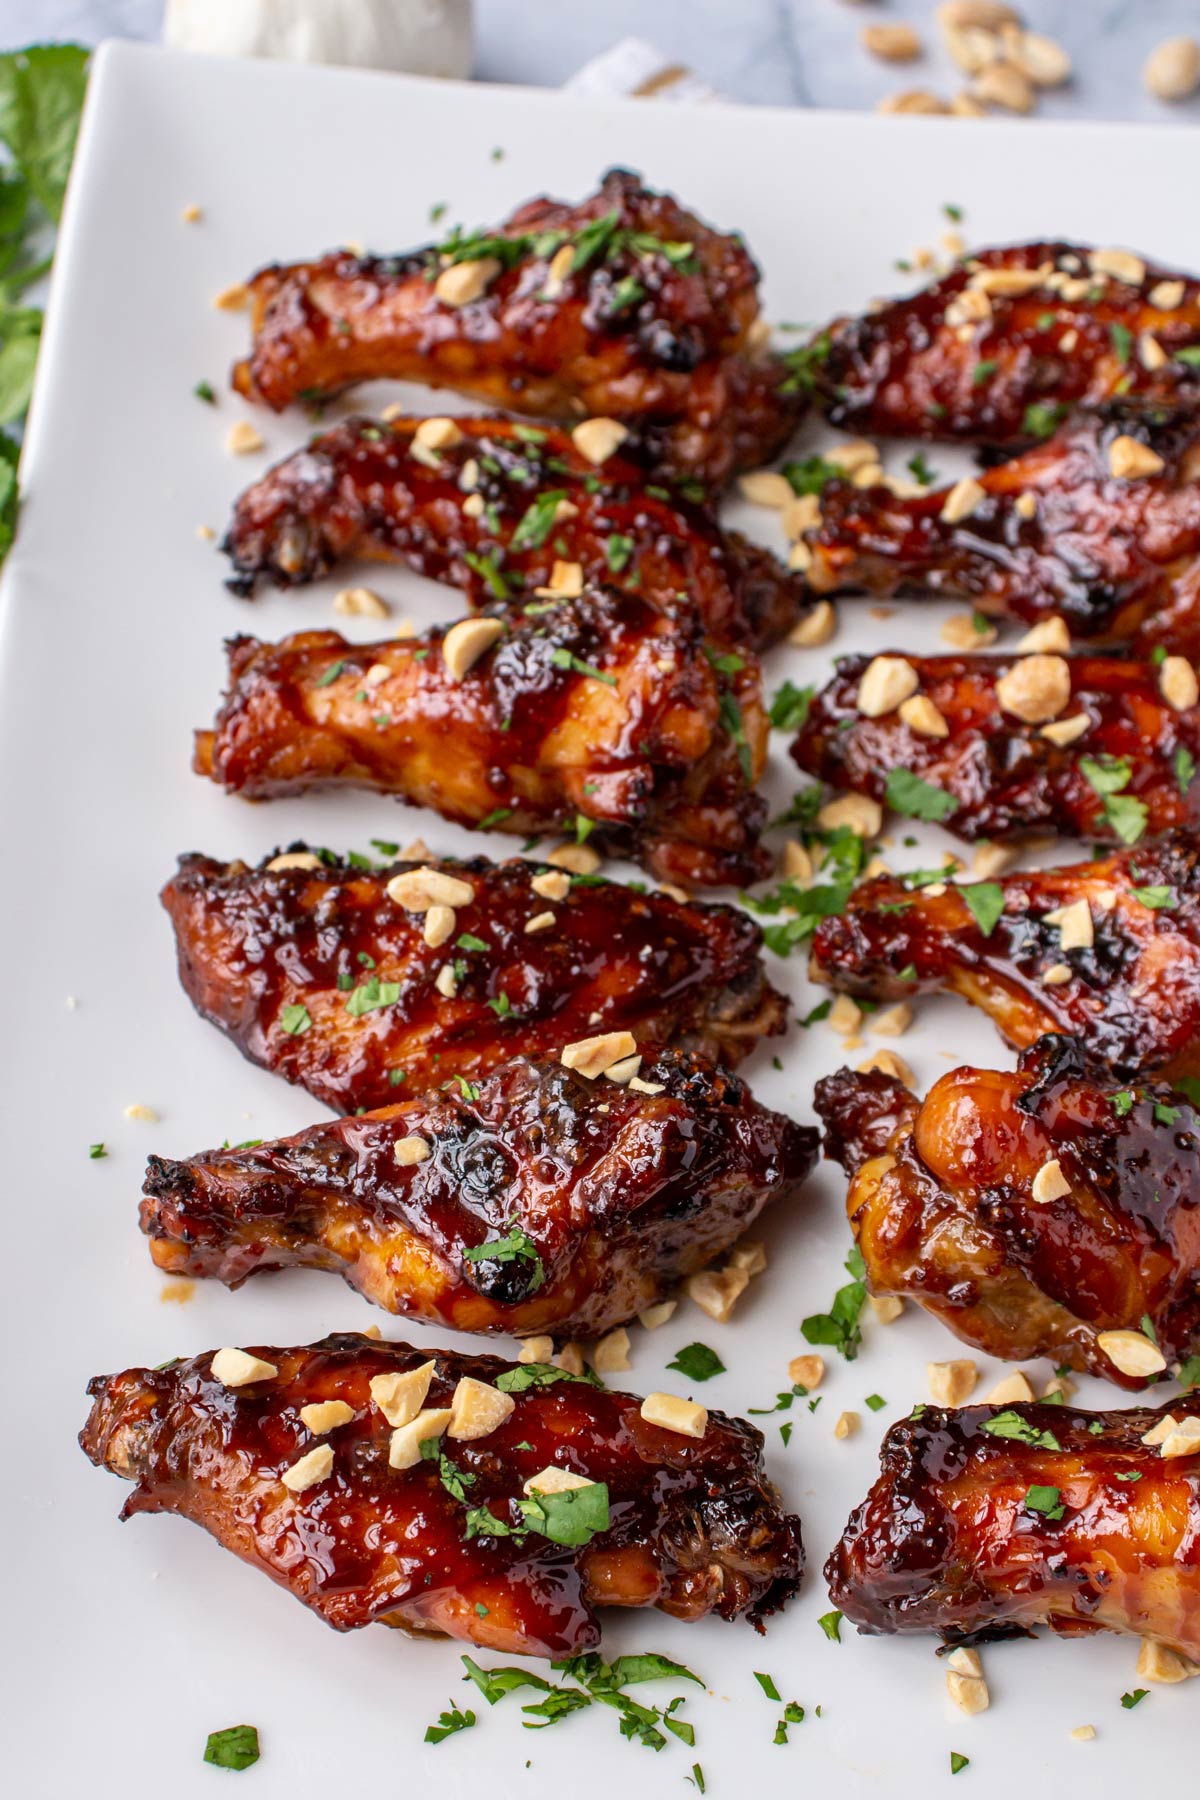 Twelve dark brown glazed chicken wings topped with cilantro and peanuts on a white platter.